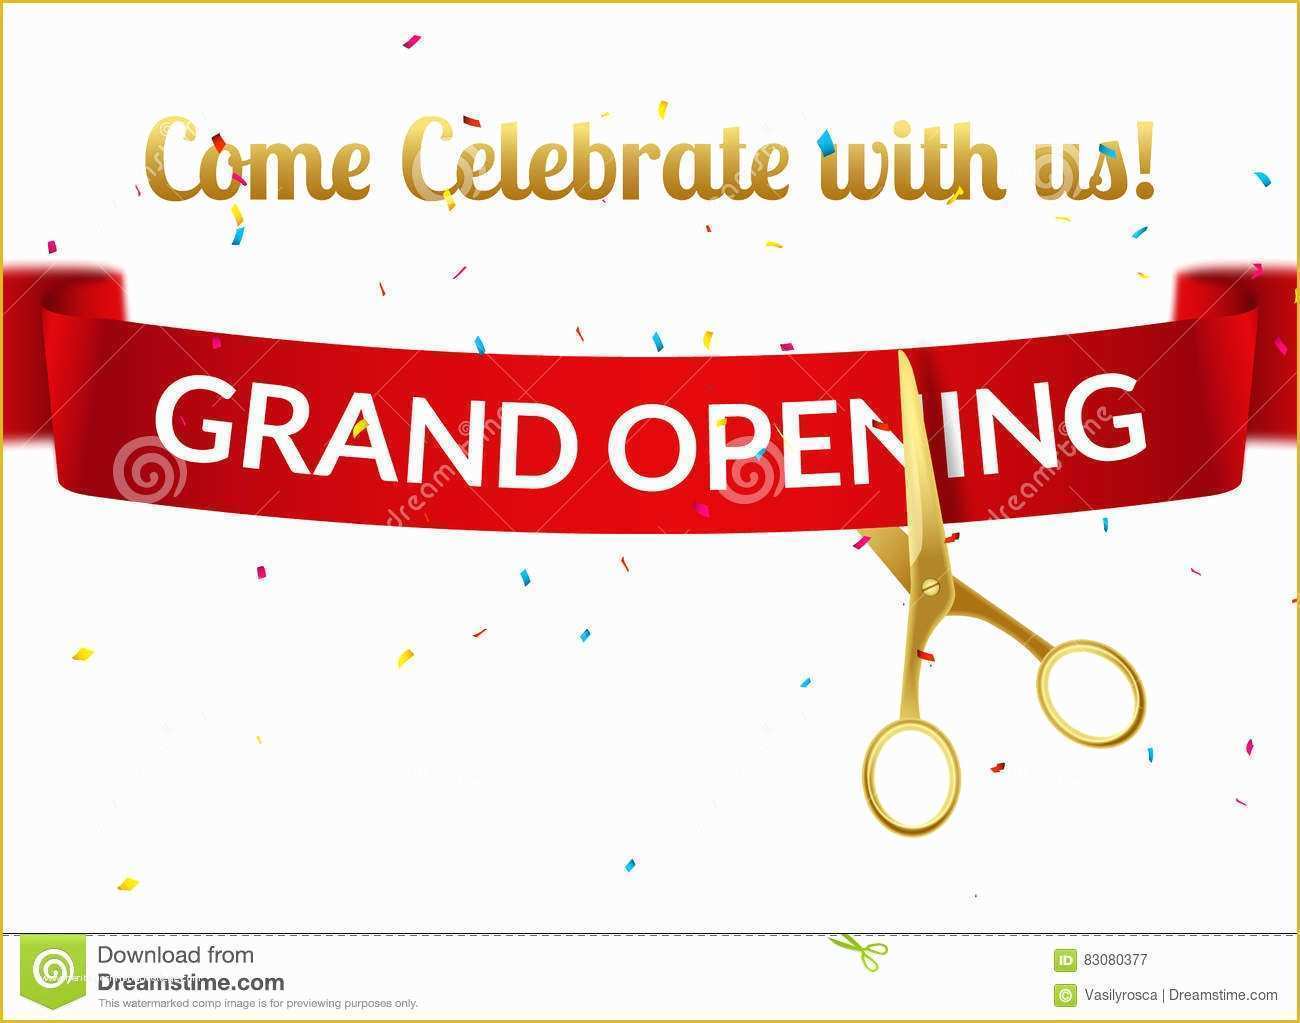 Grand Opening Invitation Template Free Of Grand Opening Invitation Template Free Templates Data